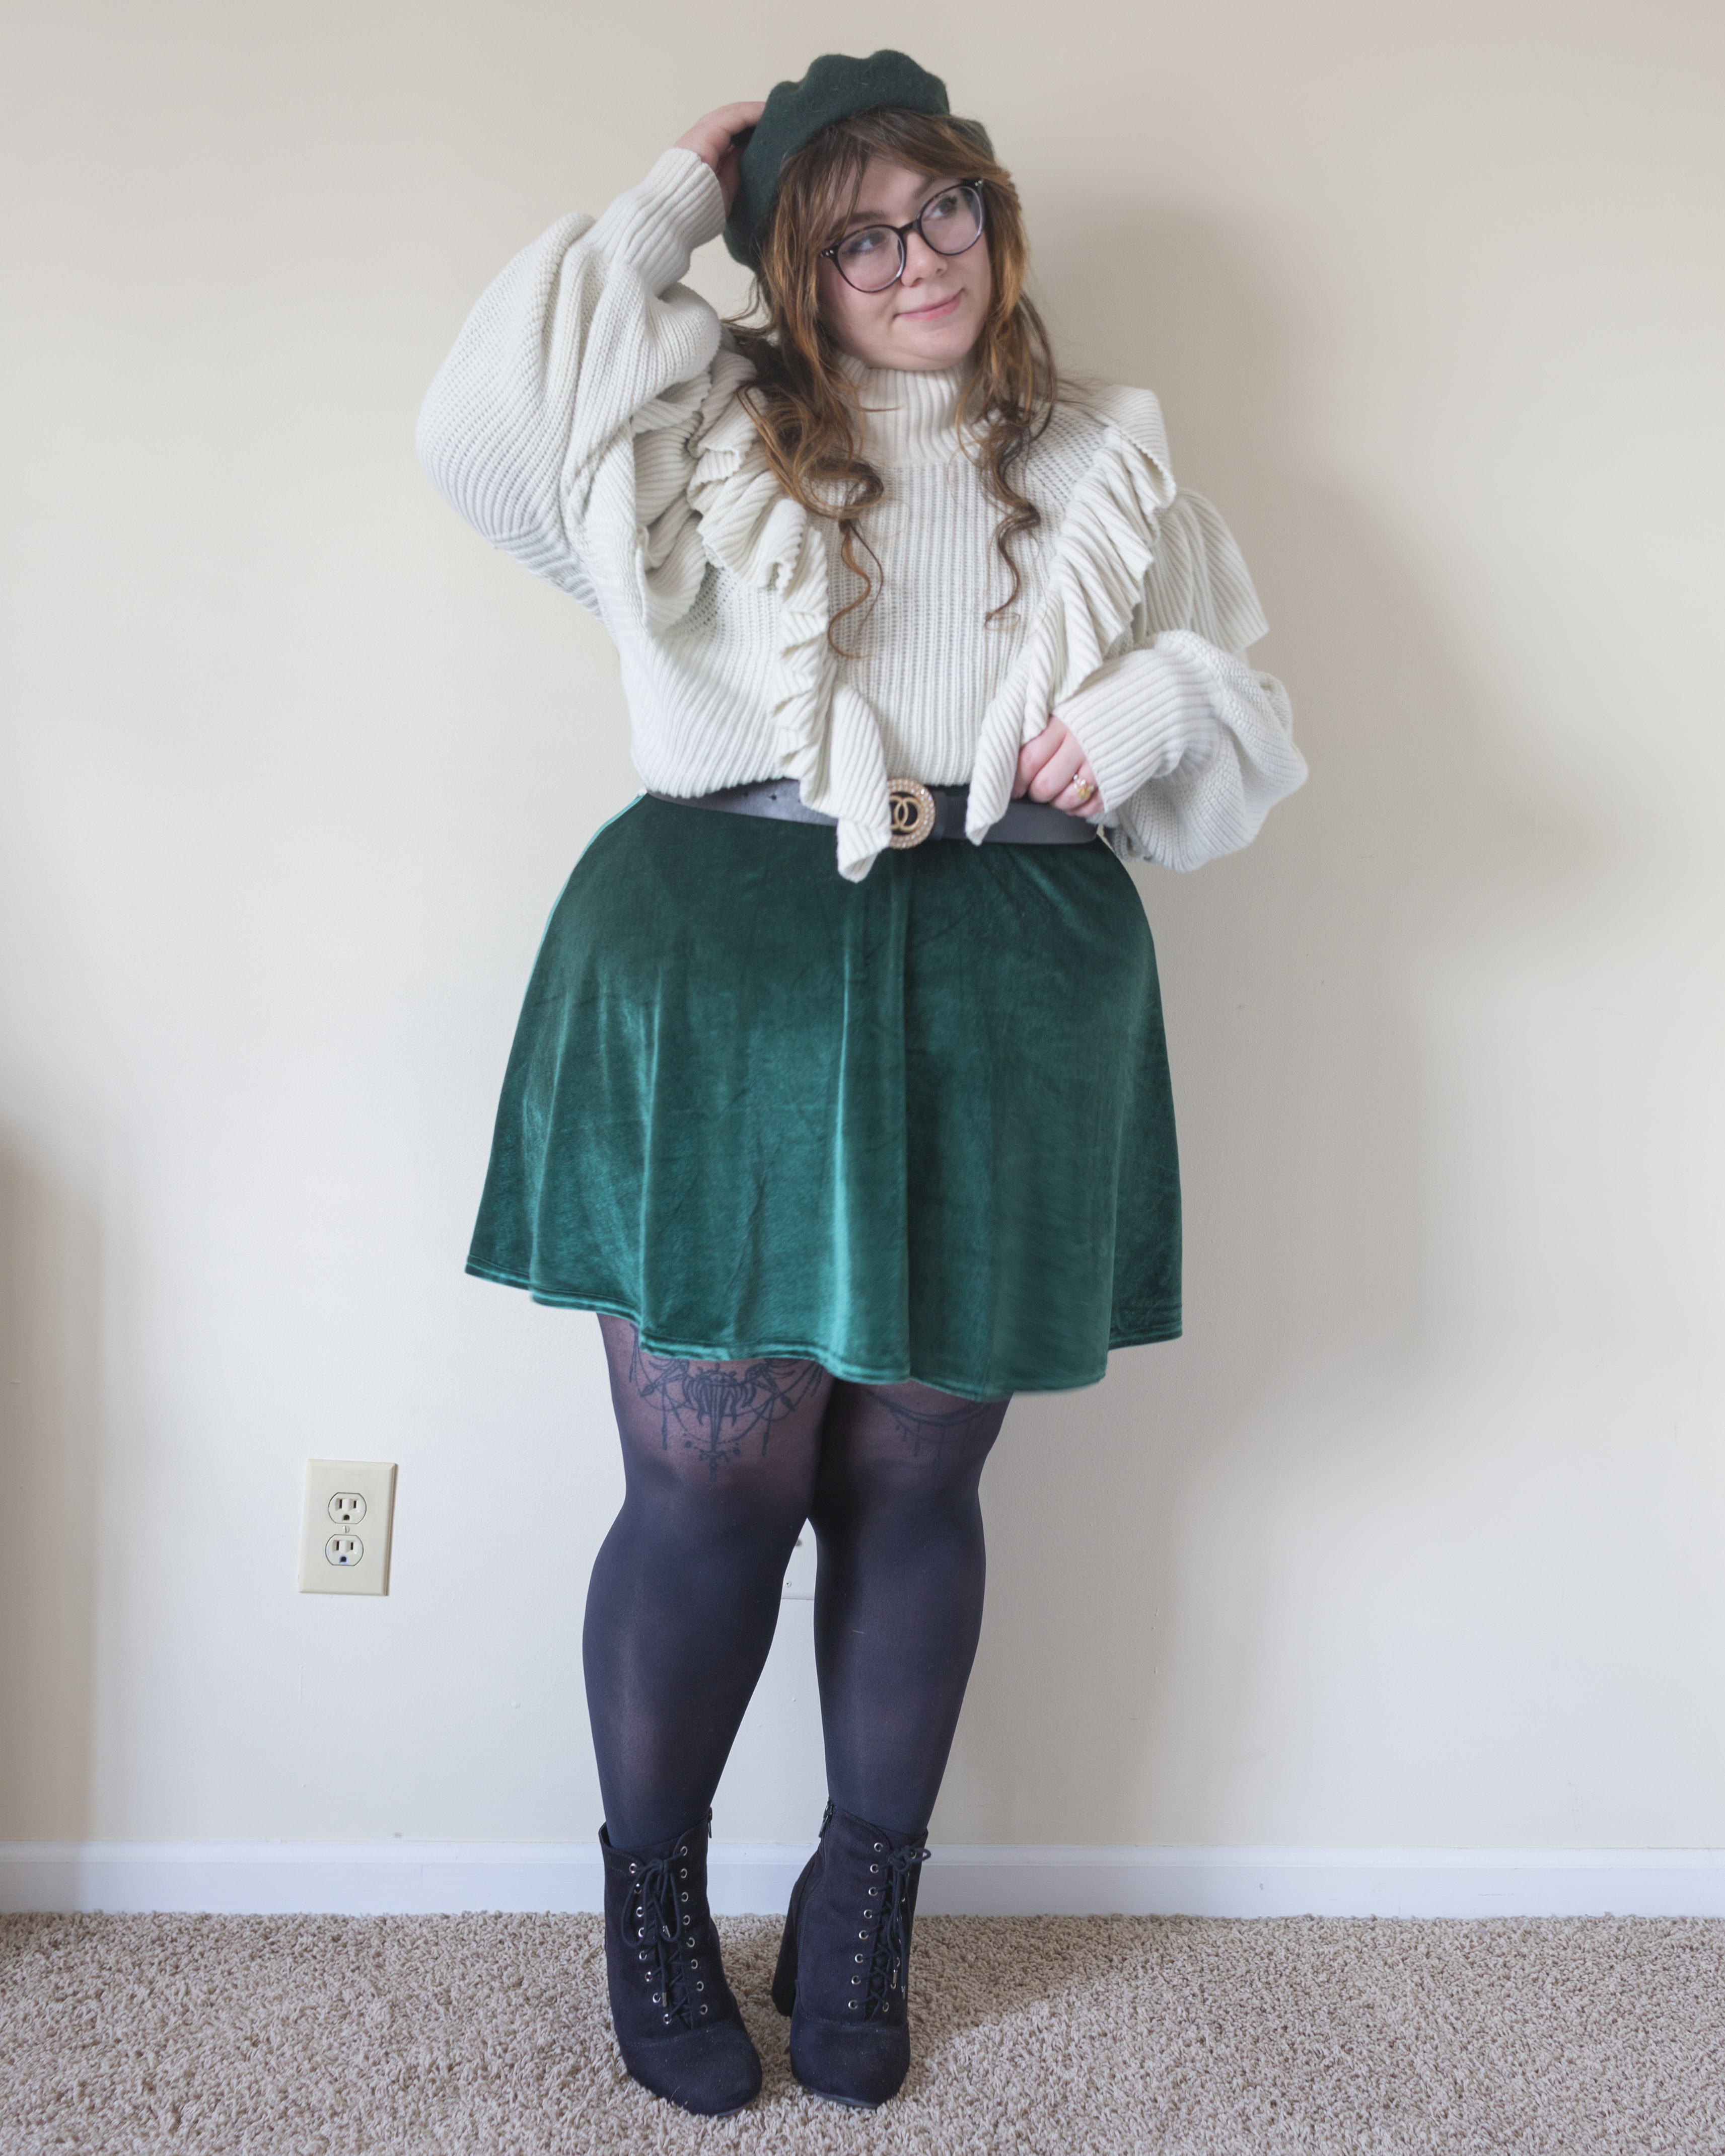 An outfit consisting of a dark green wool beret, white high neck sweater with bishop sleeves and ruffles on the bodice, tucked over a green velvet skater dress and black seude lace up block heel boots.